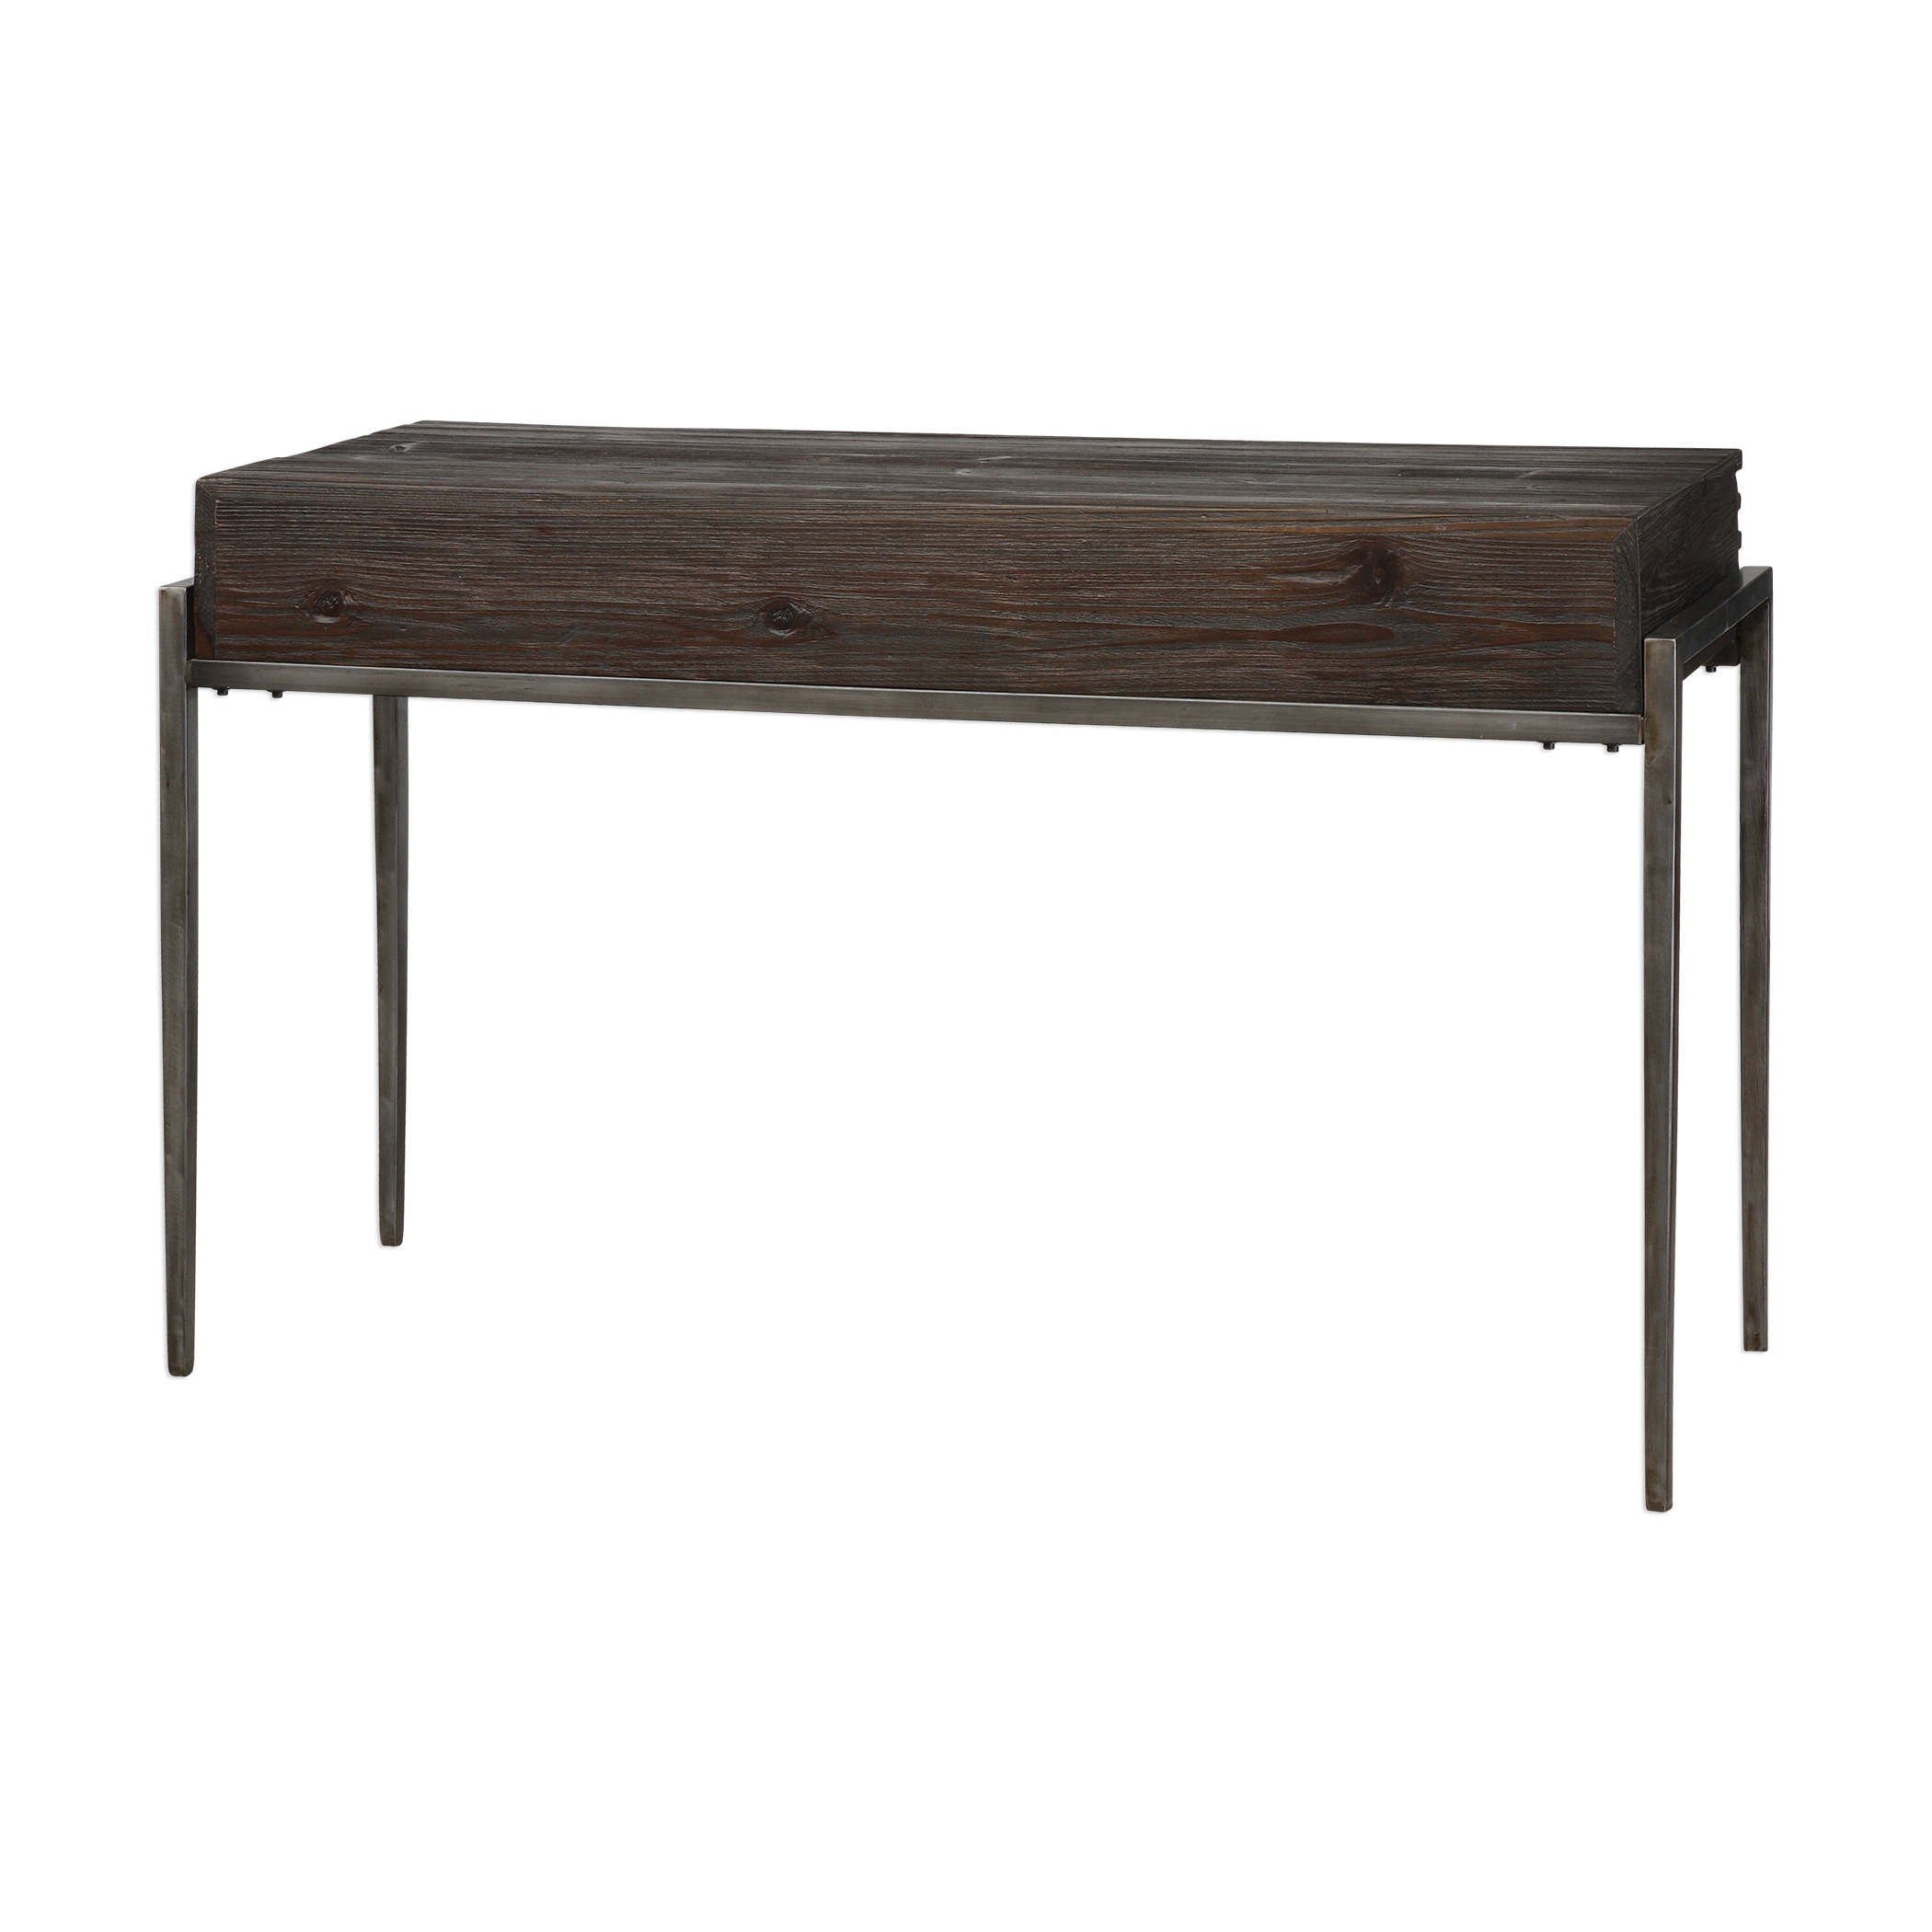 Morrigan Industrial Console Table - Image 6